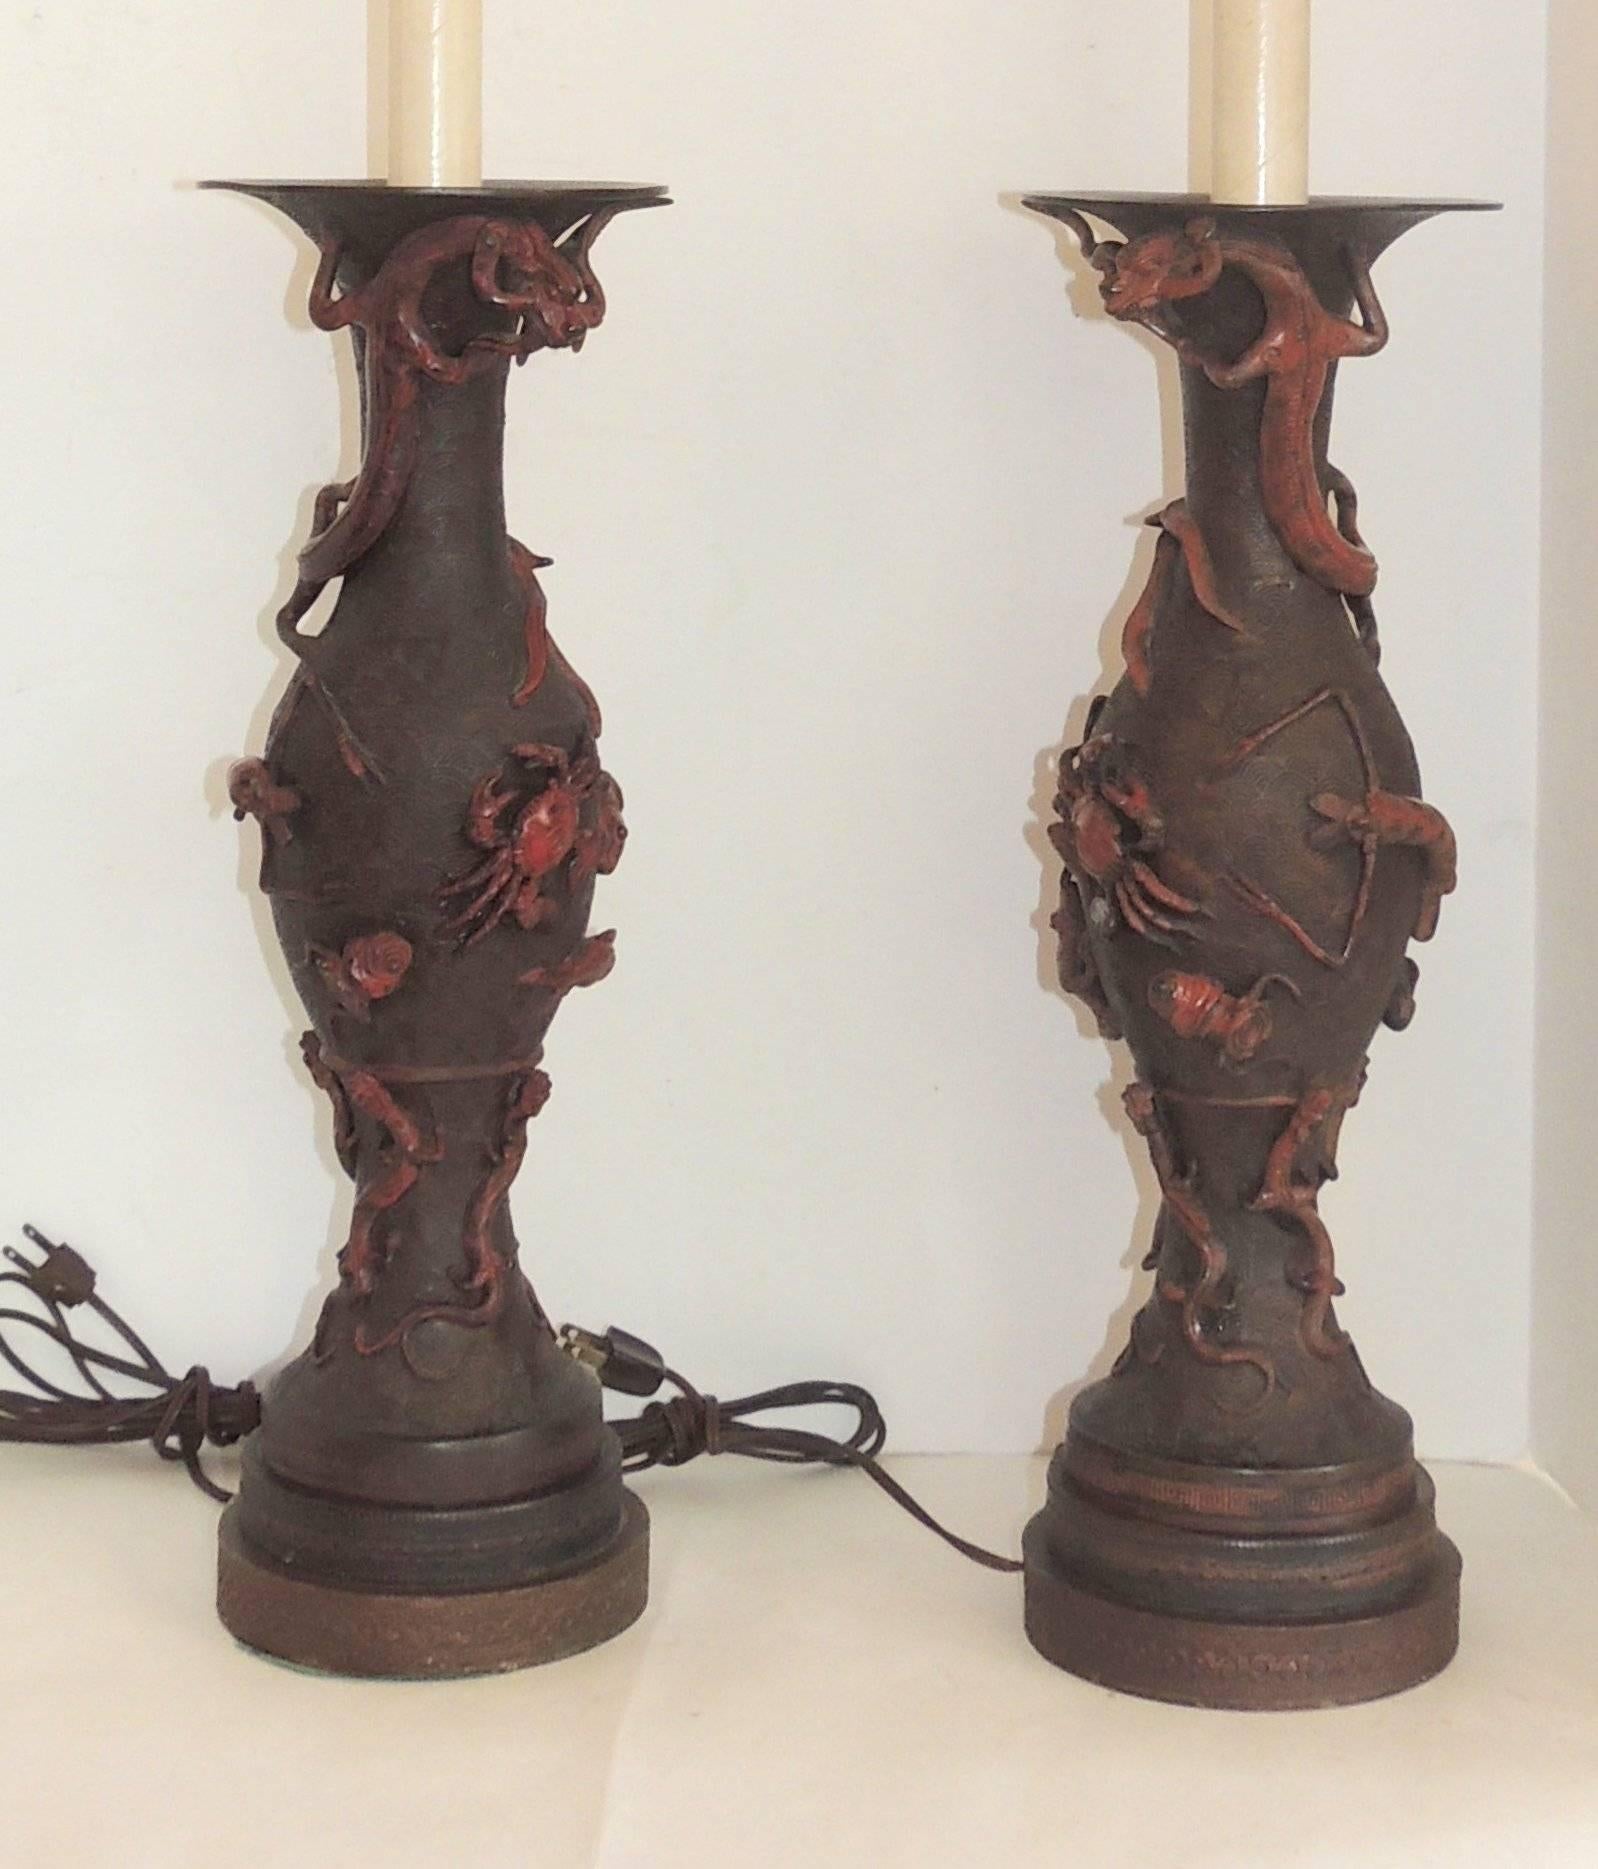 Wonderful pair of Japanese patinated bronze lamps of two facing dragons highlights this amazing pair with crabs, iguanas, koi, frogs, lobsters and hermit craps.
Measures:
Lamp 39" H x 6.5" W.

Base: 19.5" H.